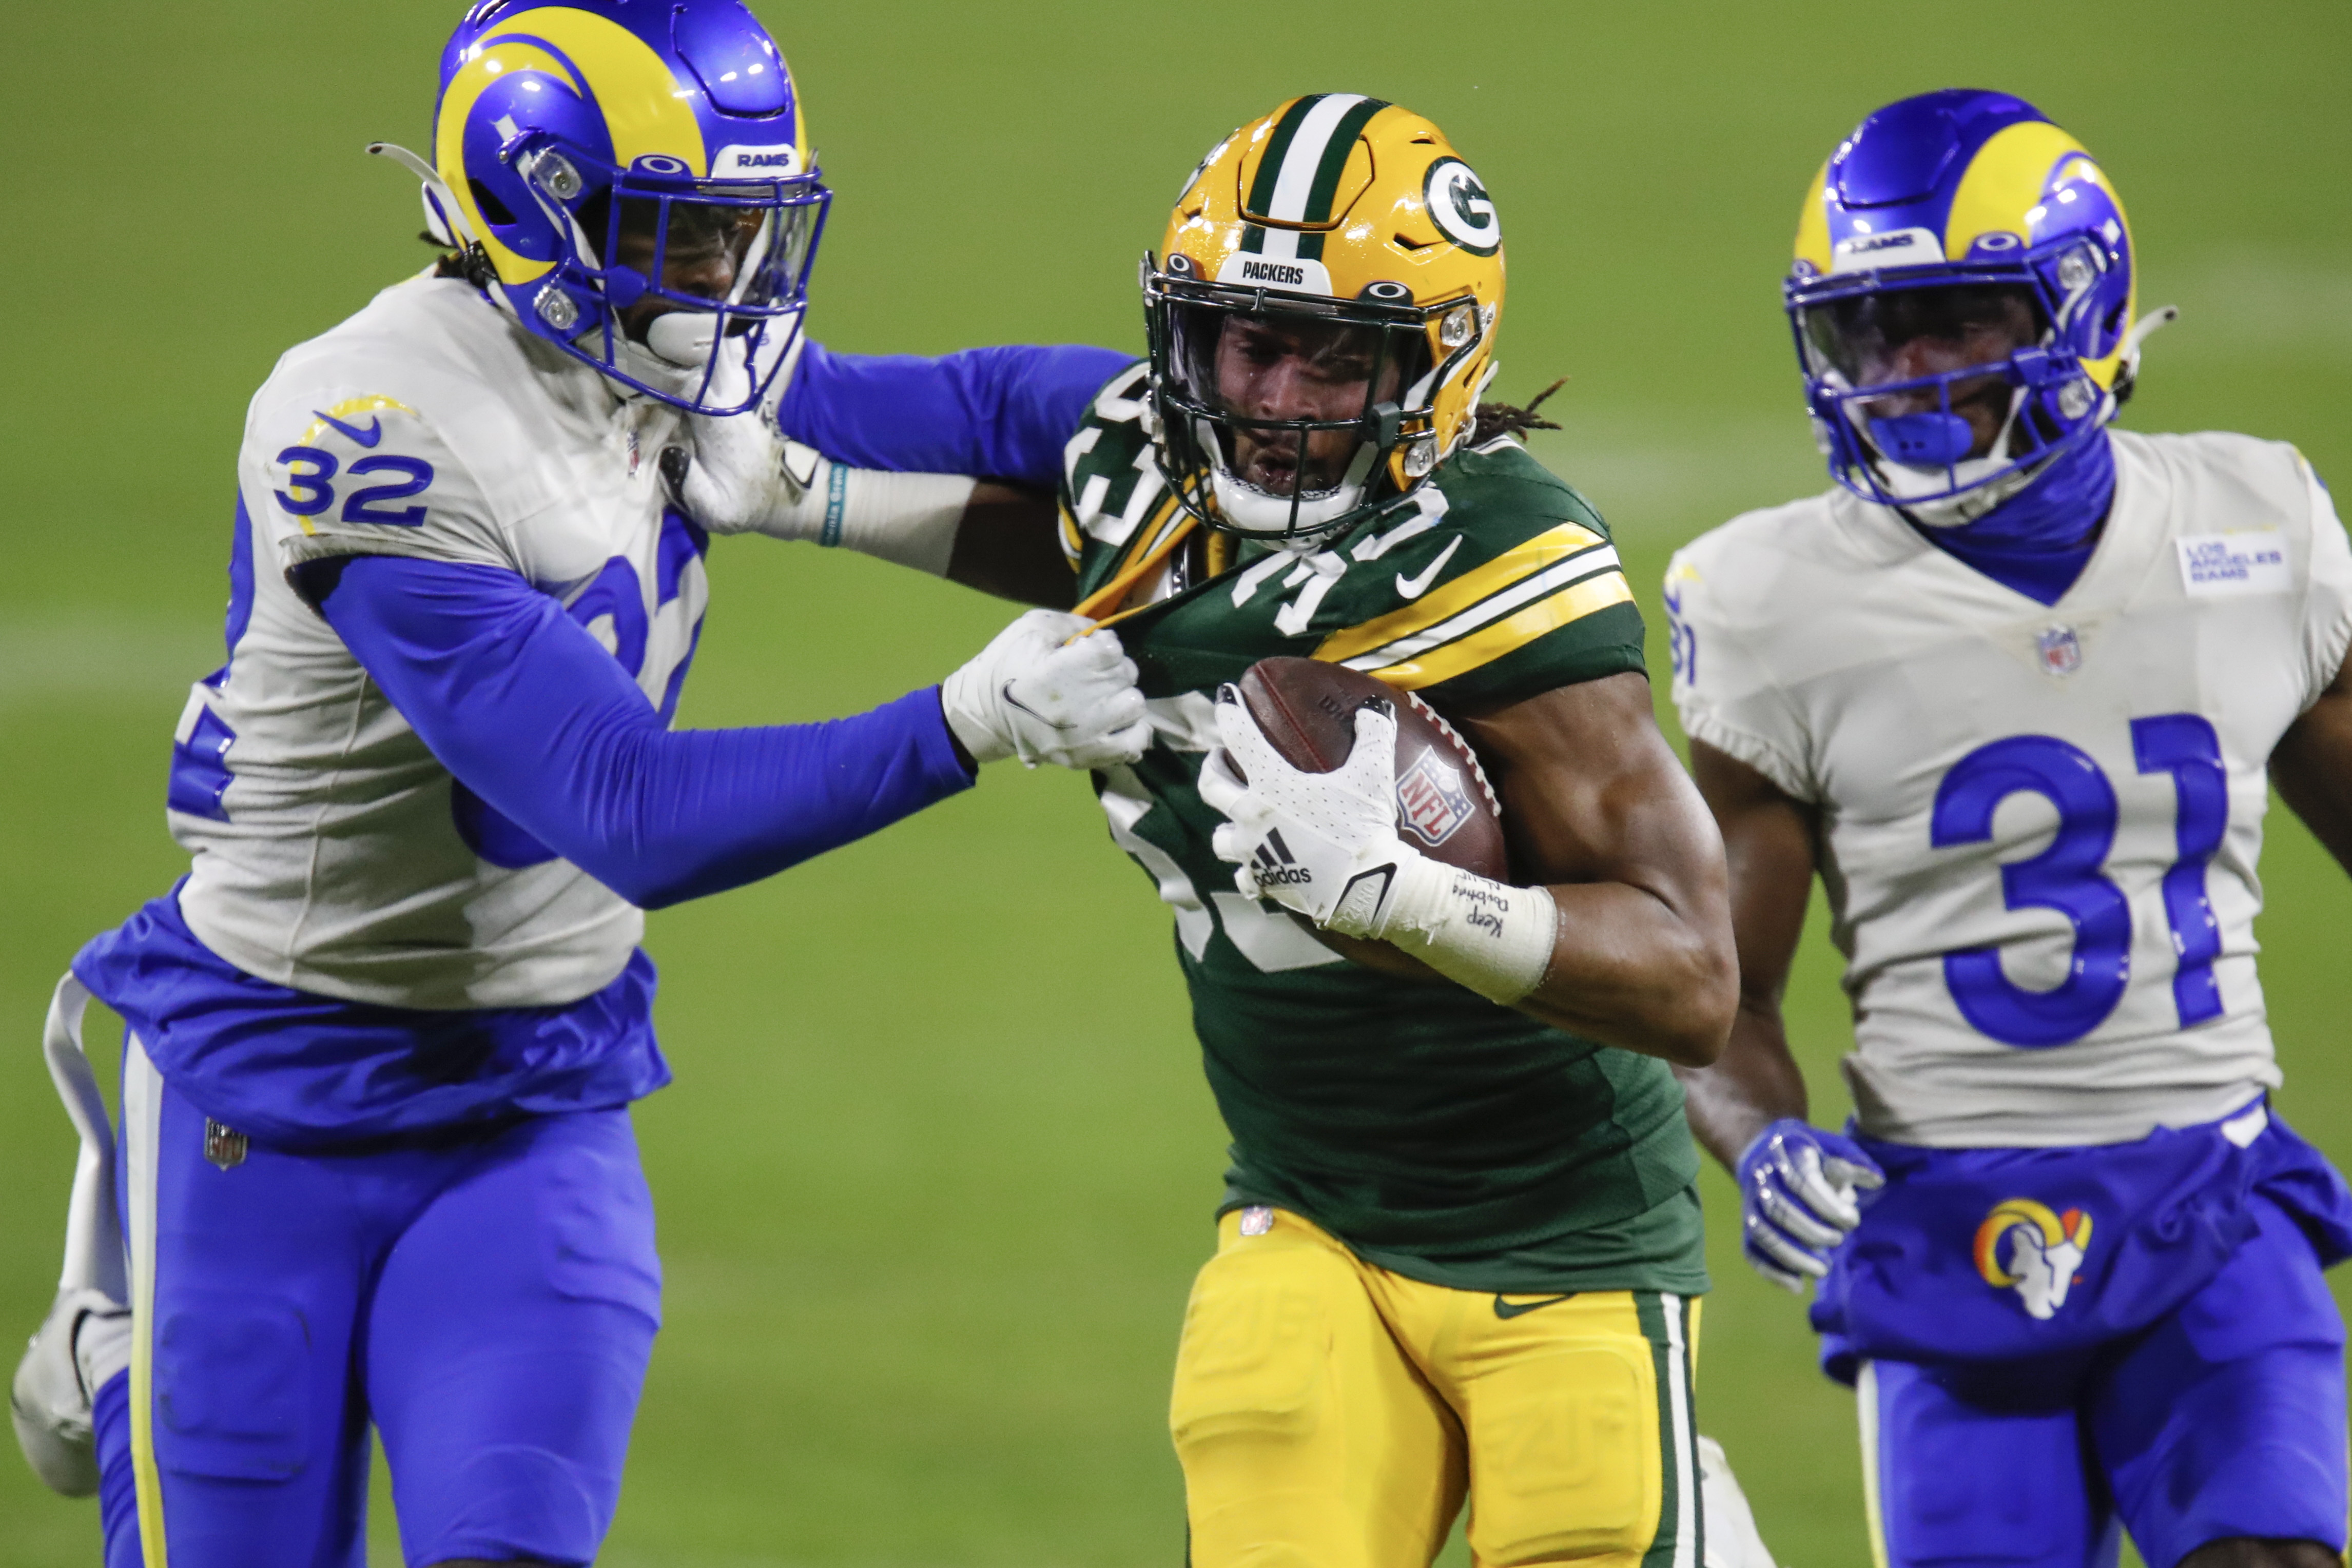 Aaron Jones and AJ Dillon are Going to Make History This Year